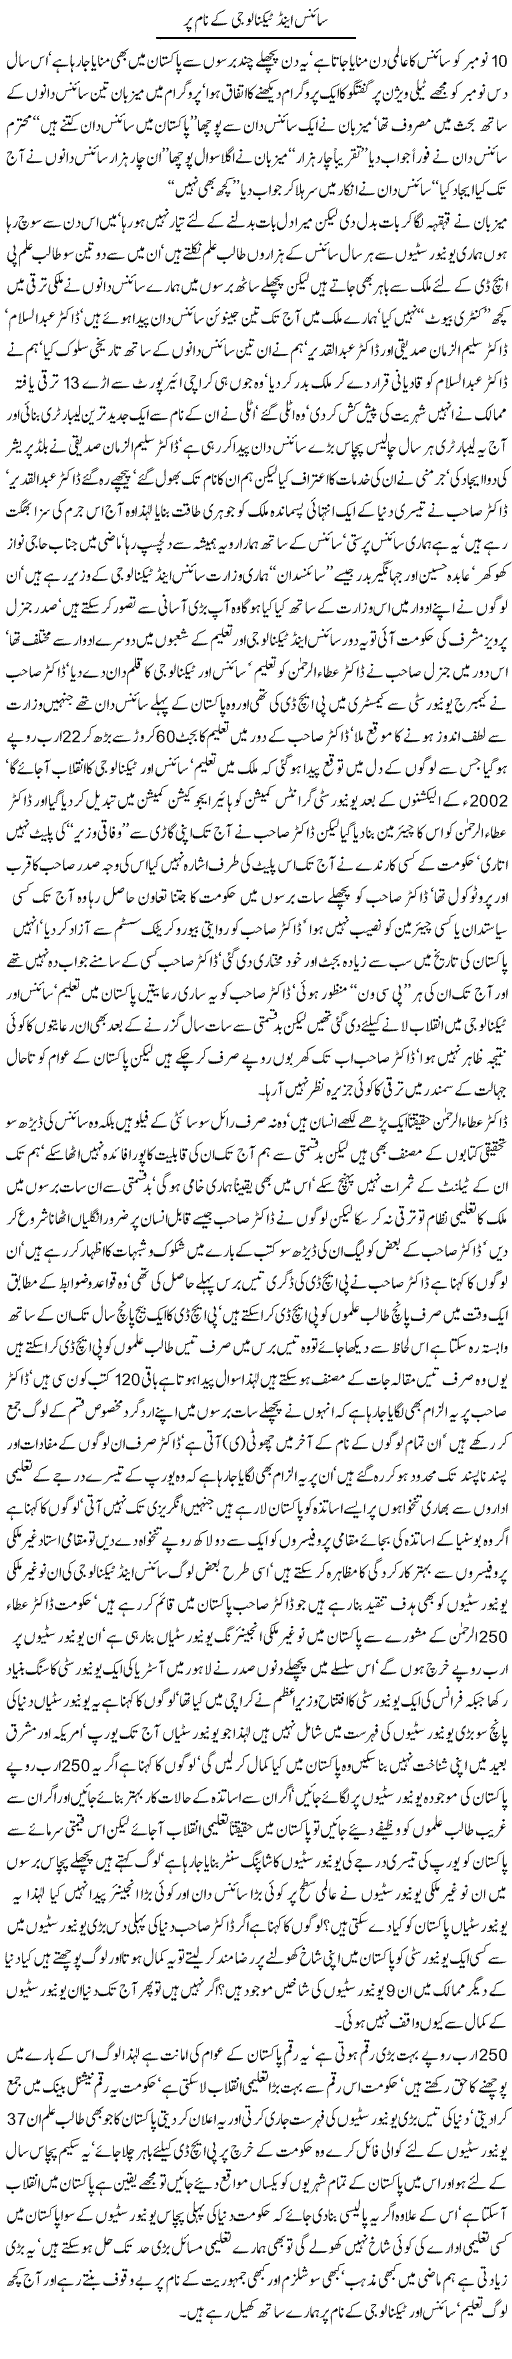 Science and technology k naam pr by Javed Chaudhry 24nov 2006